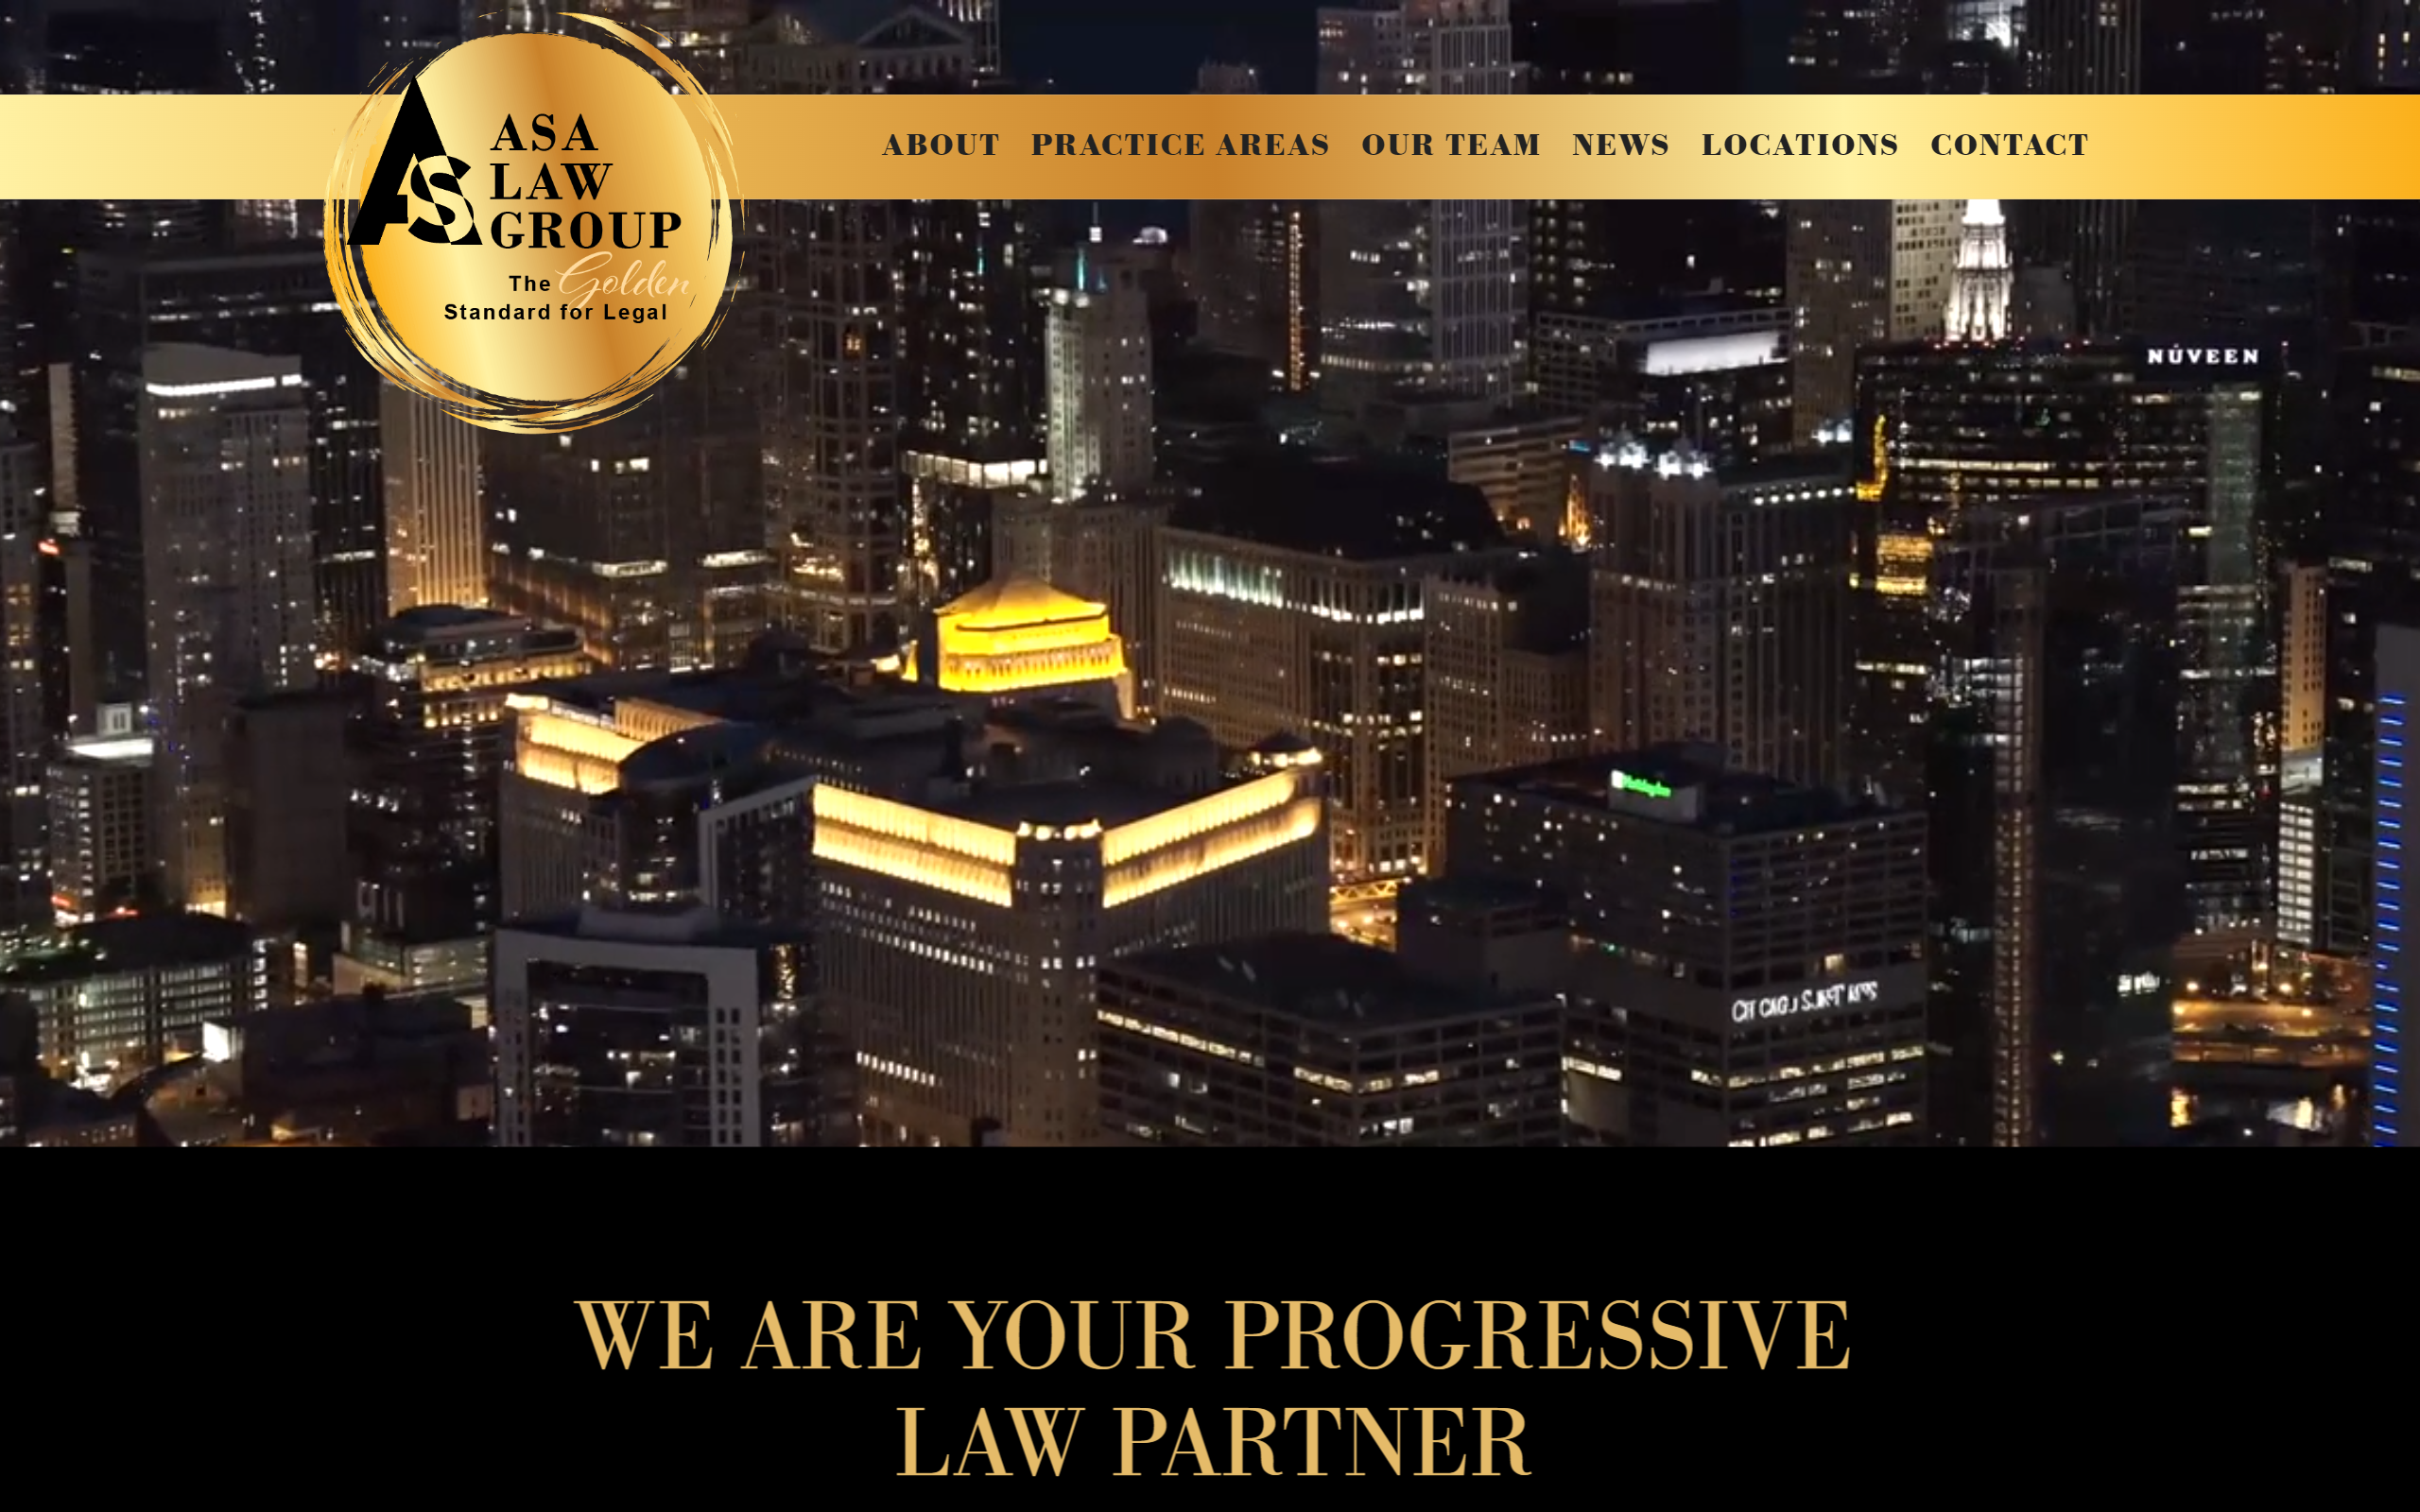 ASA Law Group law firm website